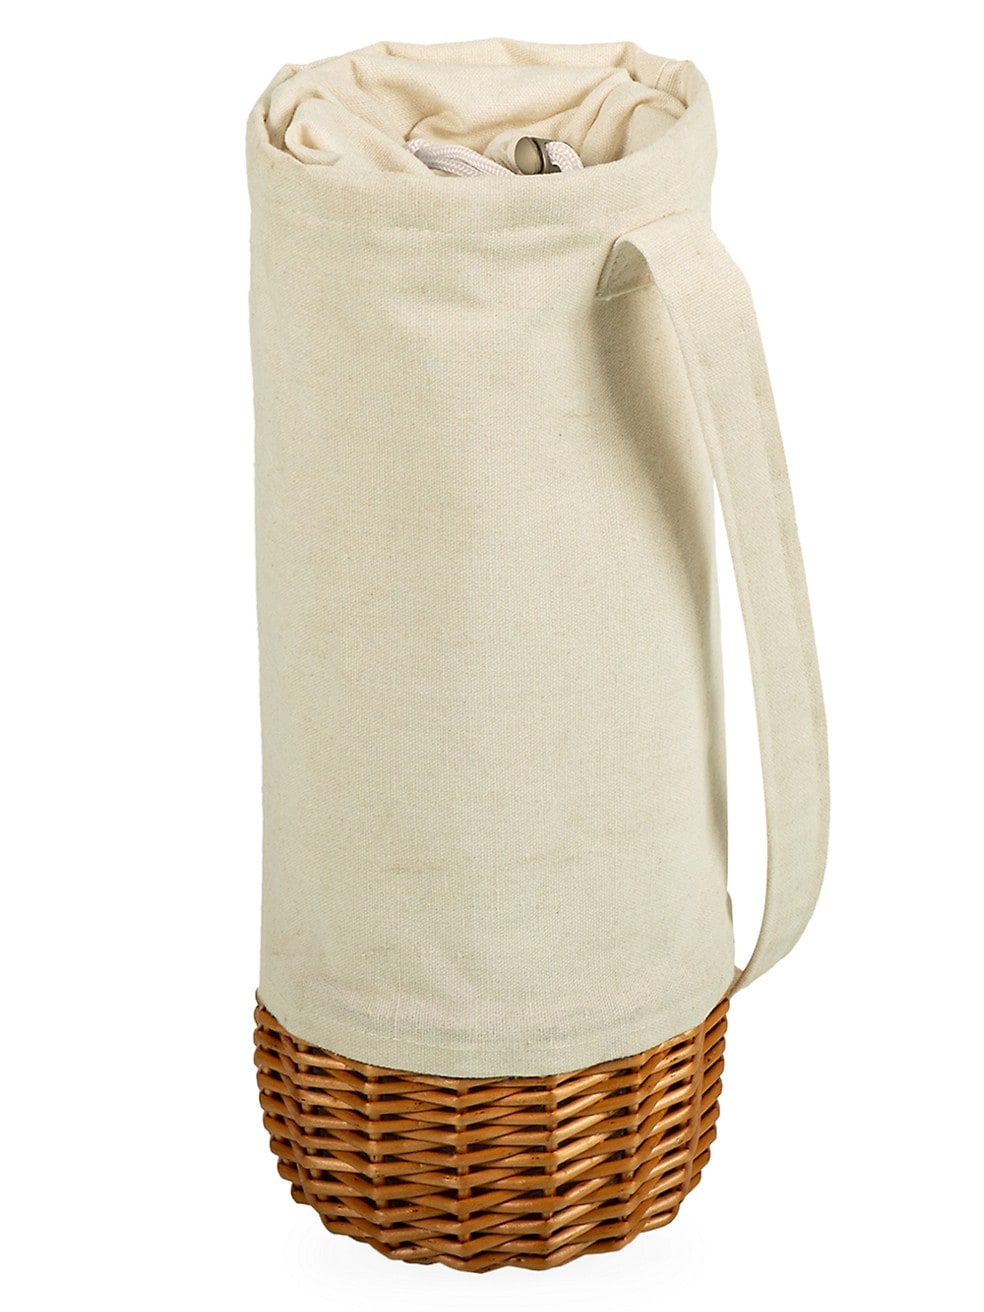 Malbec Insulated Canvas & Willow Wine Bottle Basket